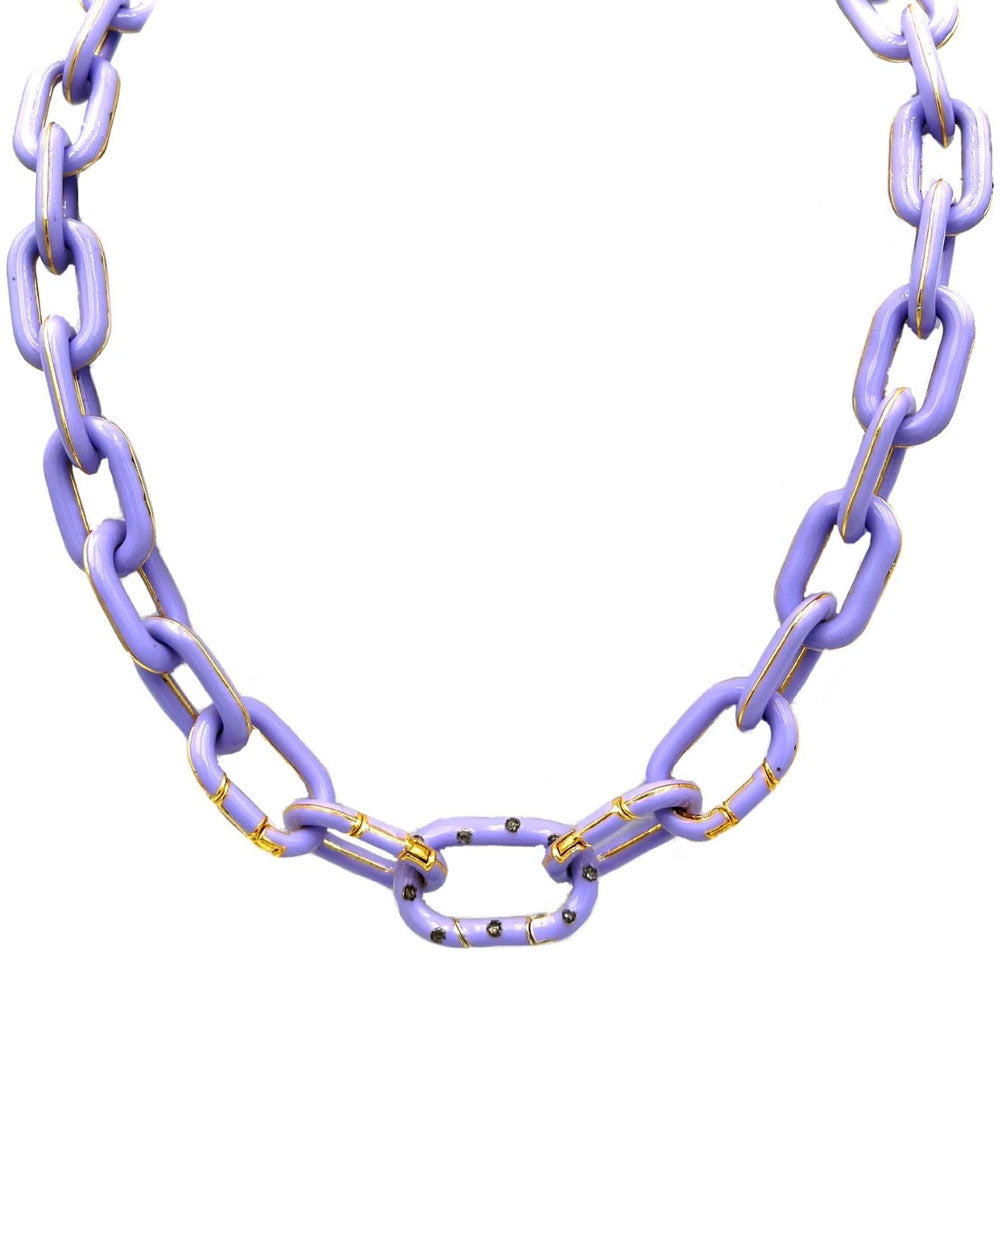 Plated Gold Periwinkle Link Necklace with Diamonds